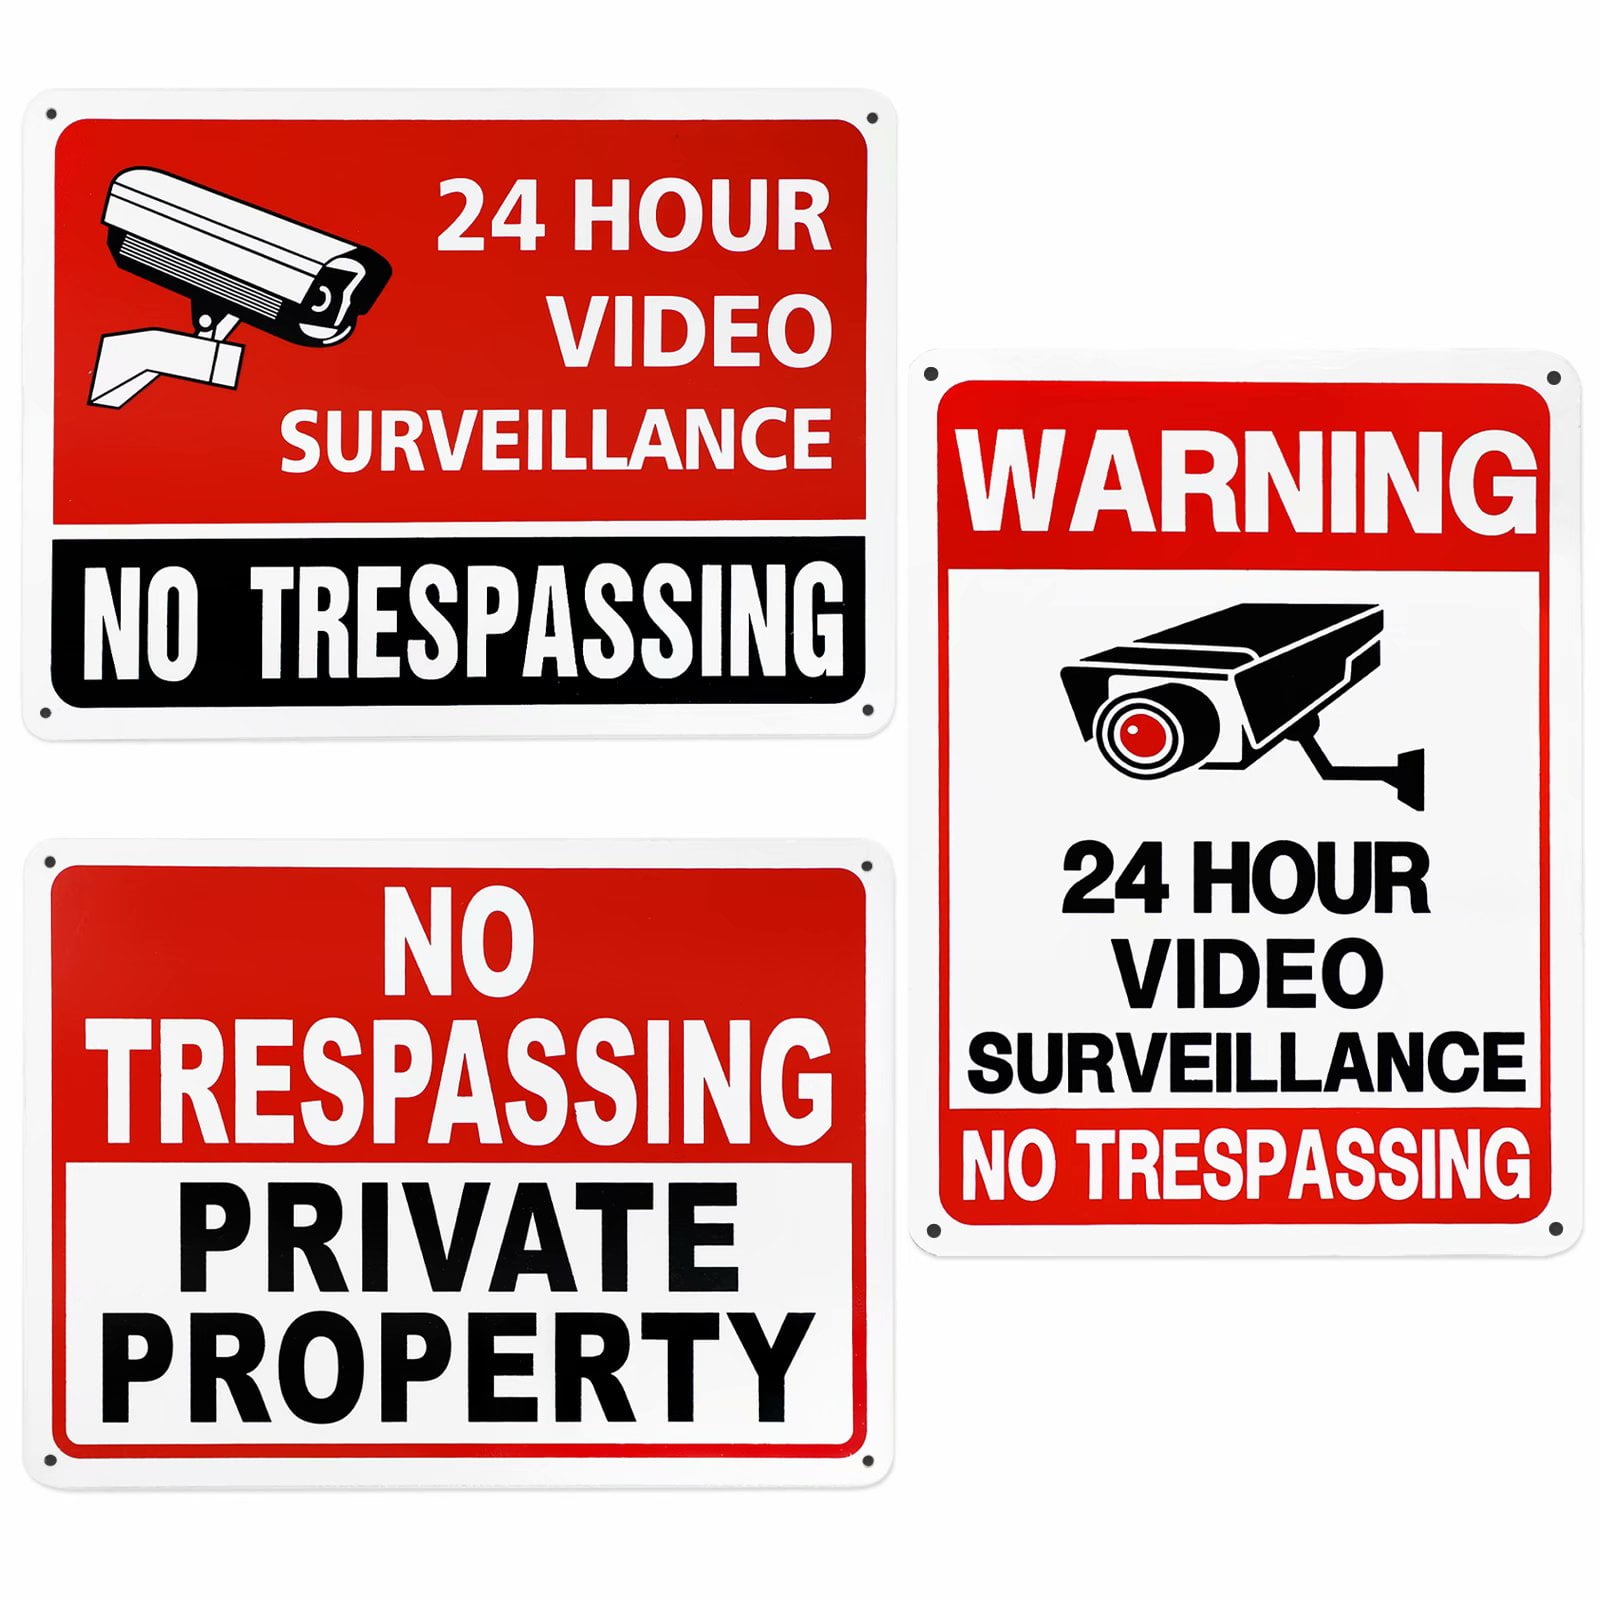 Details about   CCTV SURVEILLANCE SECURITY C STORE VIDEO CAMERAS WARNING YARD FENCE WINDOW SIGN 